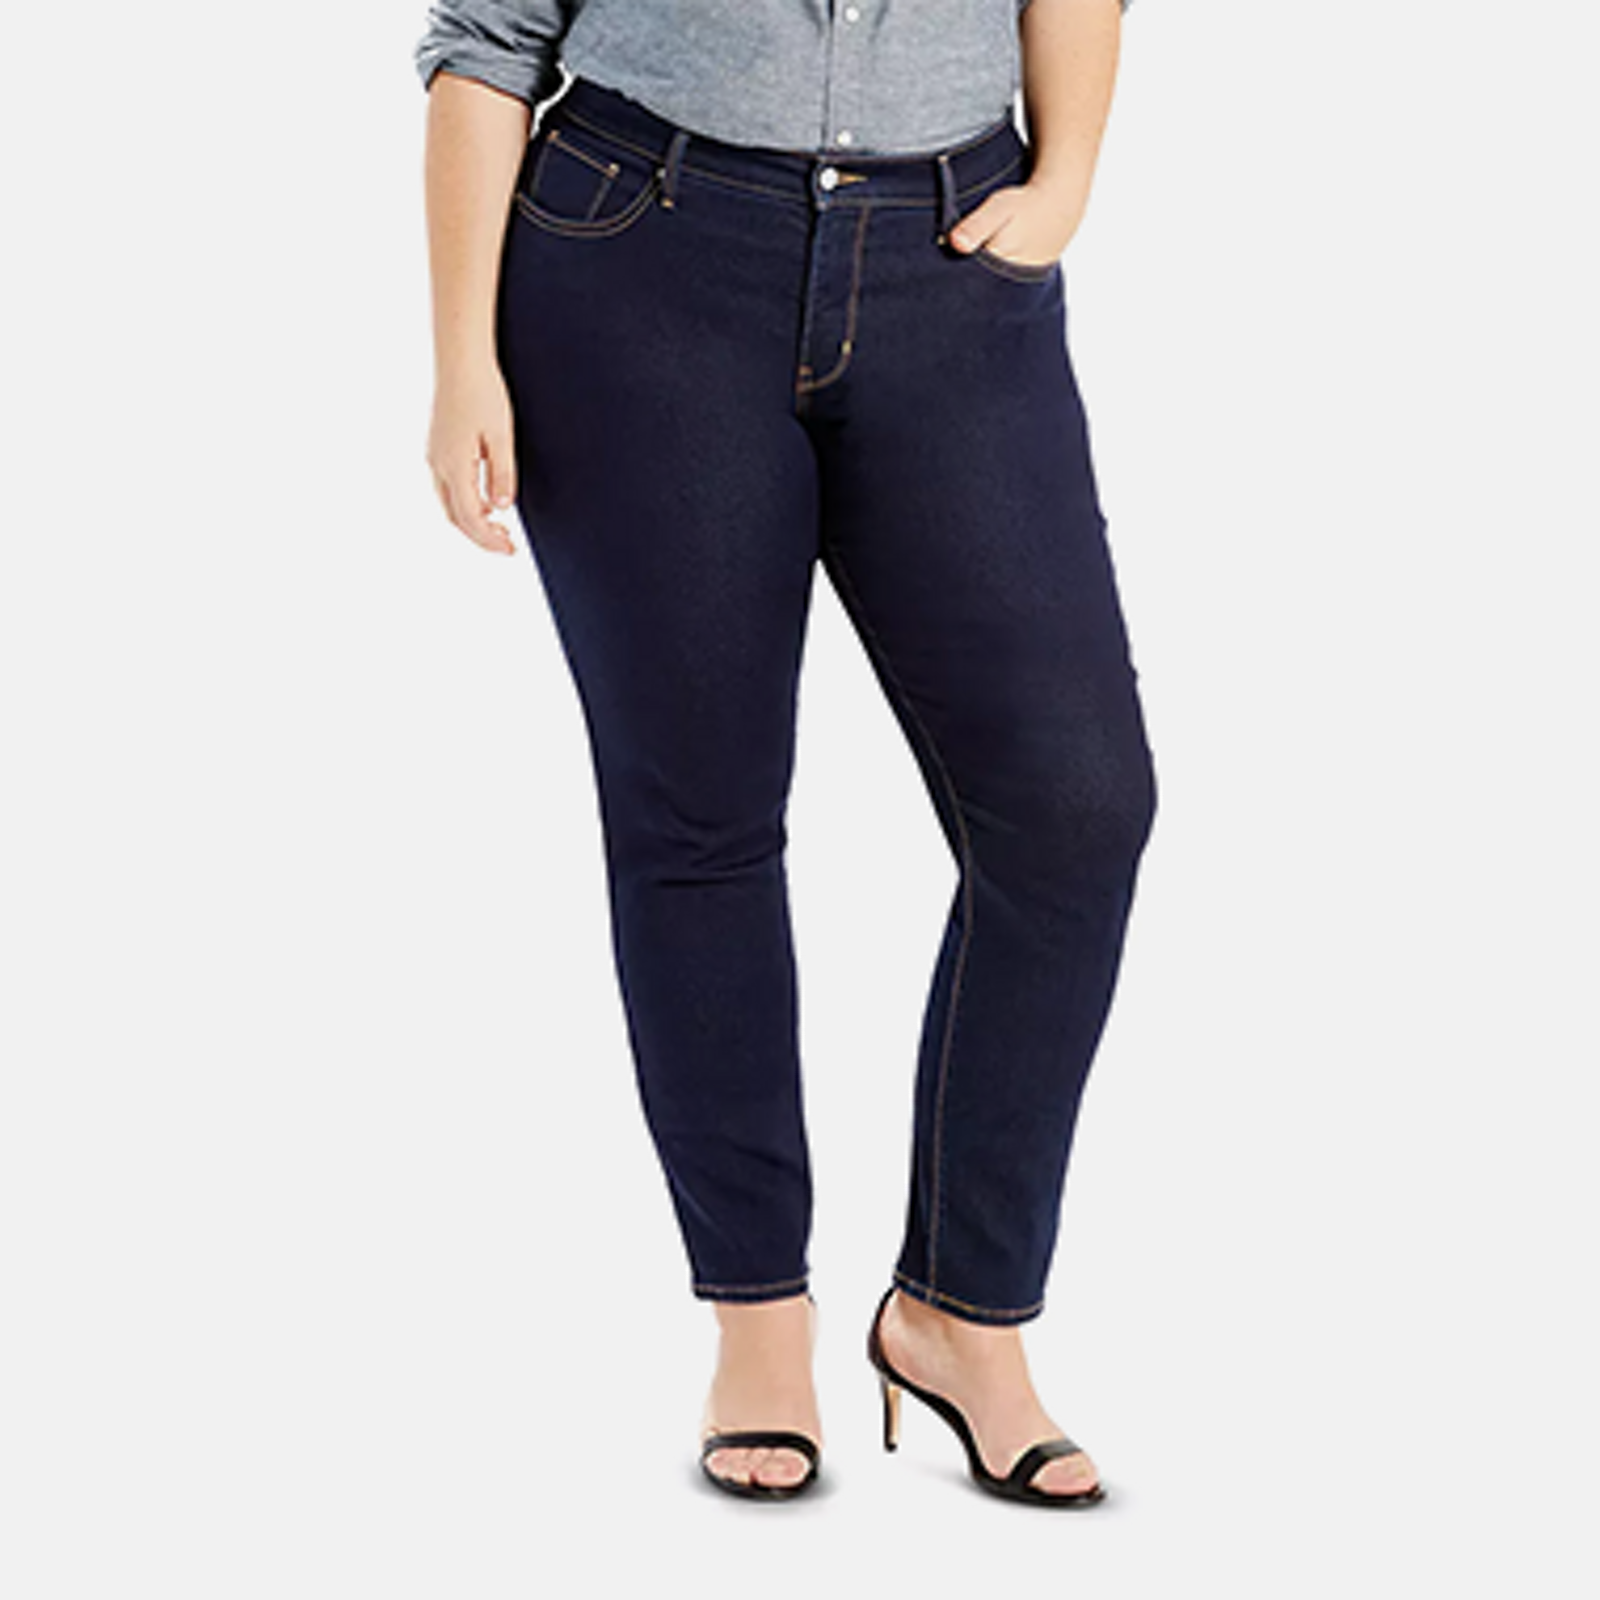 Jeggings Colored Jeans For Women - Macy's